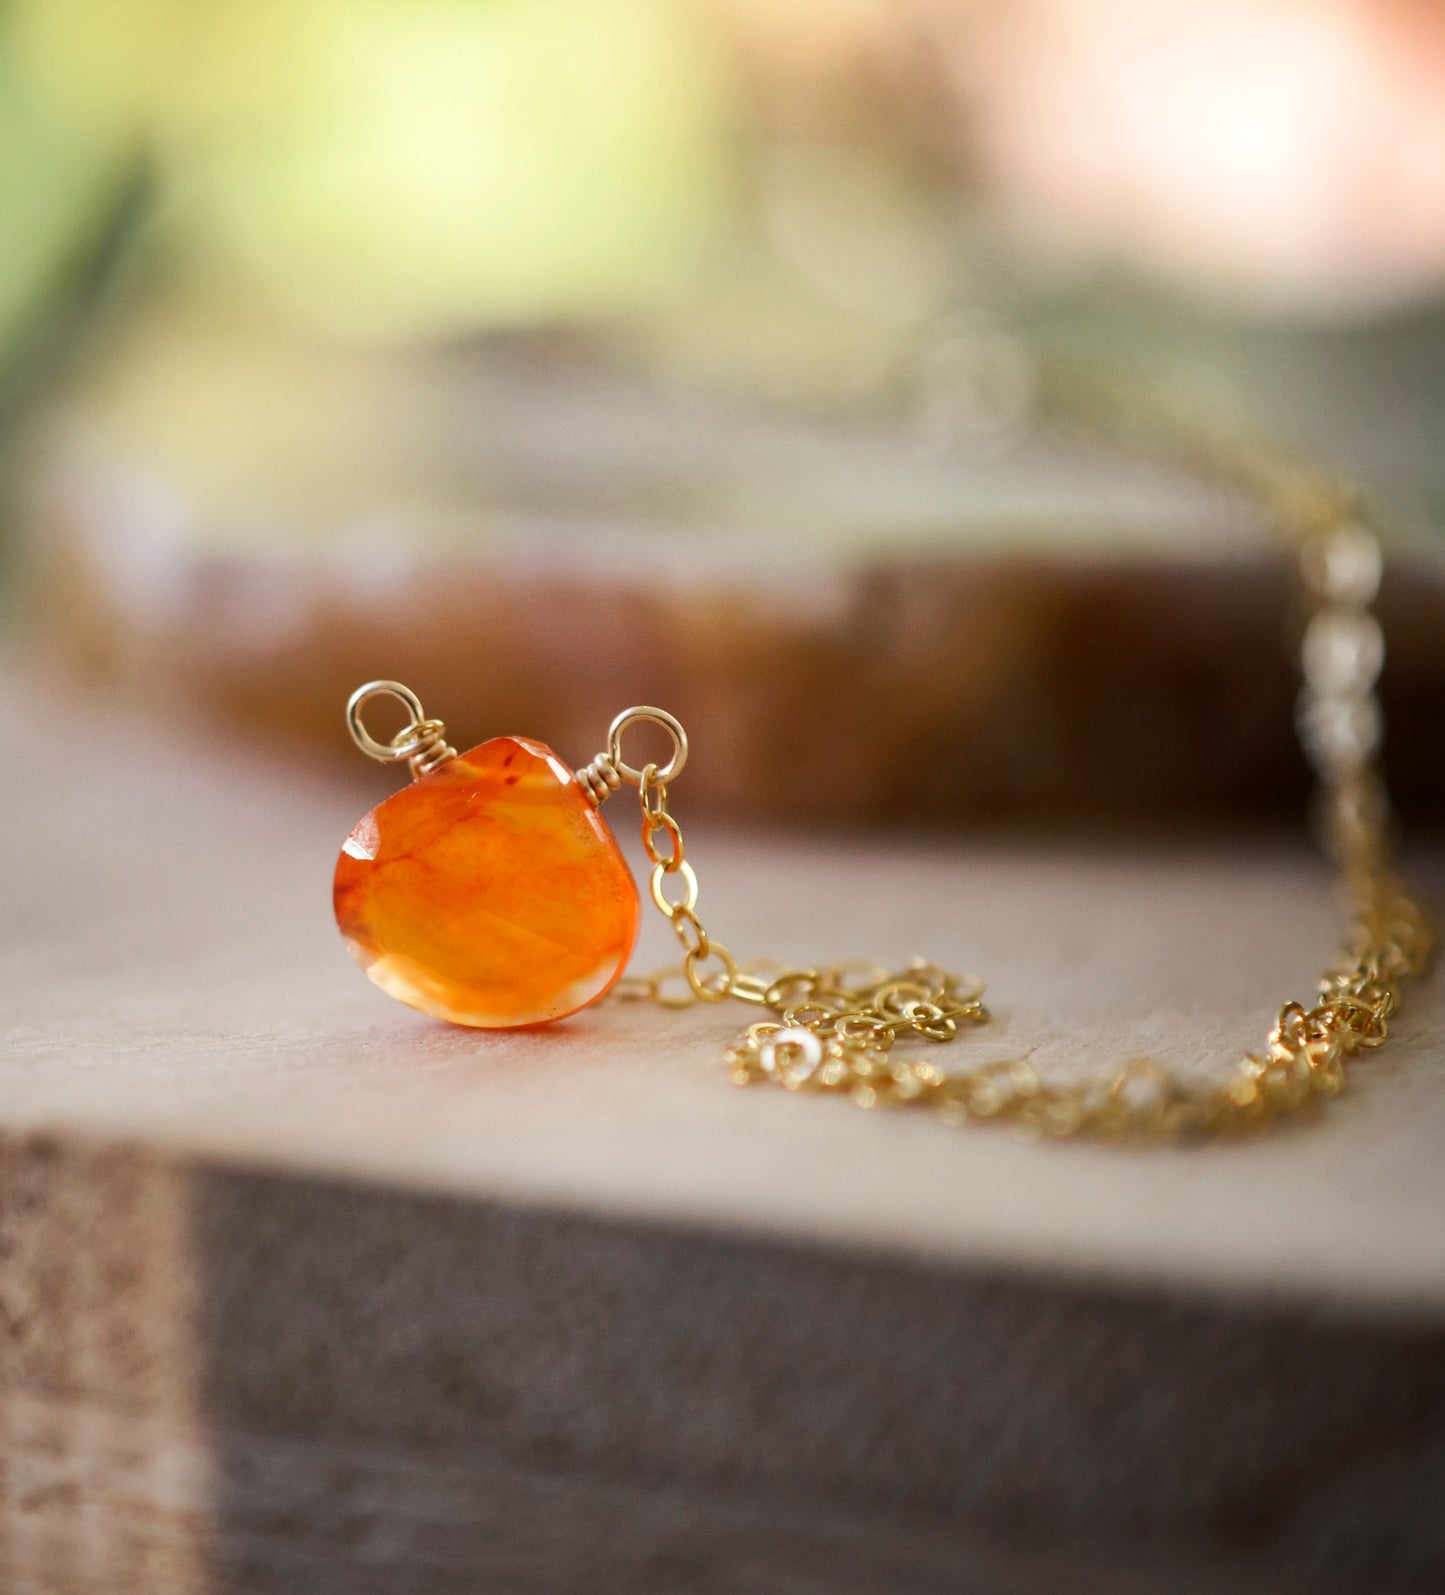 Handmade orange Carnelian Necklace. A single teardrop gemstone placed onto a sterling silver or gold filled chain. Detail Image.